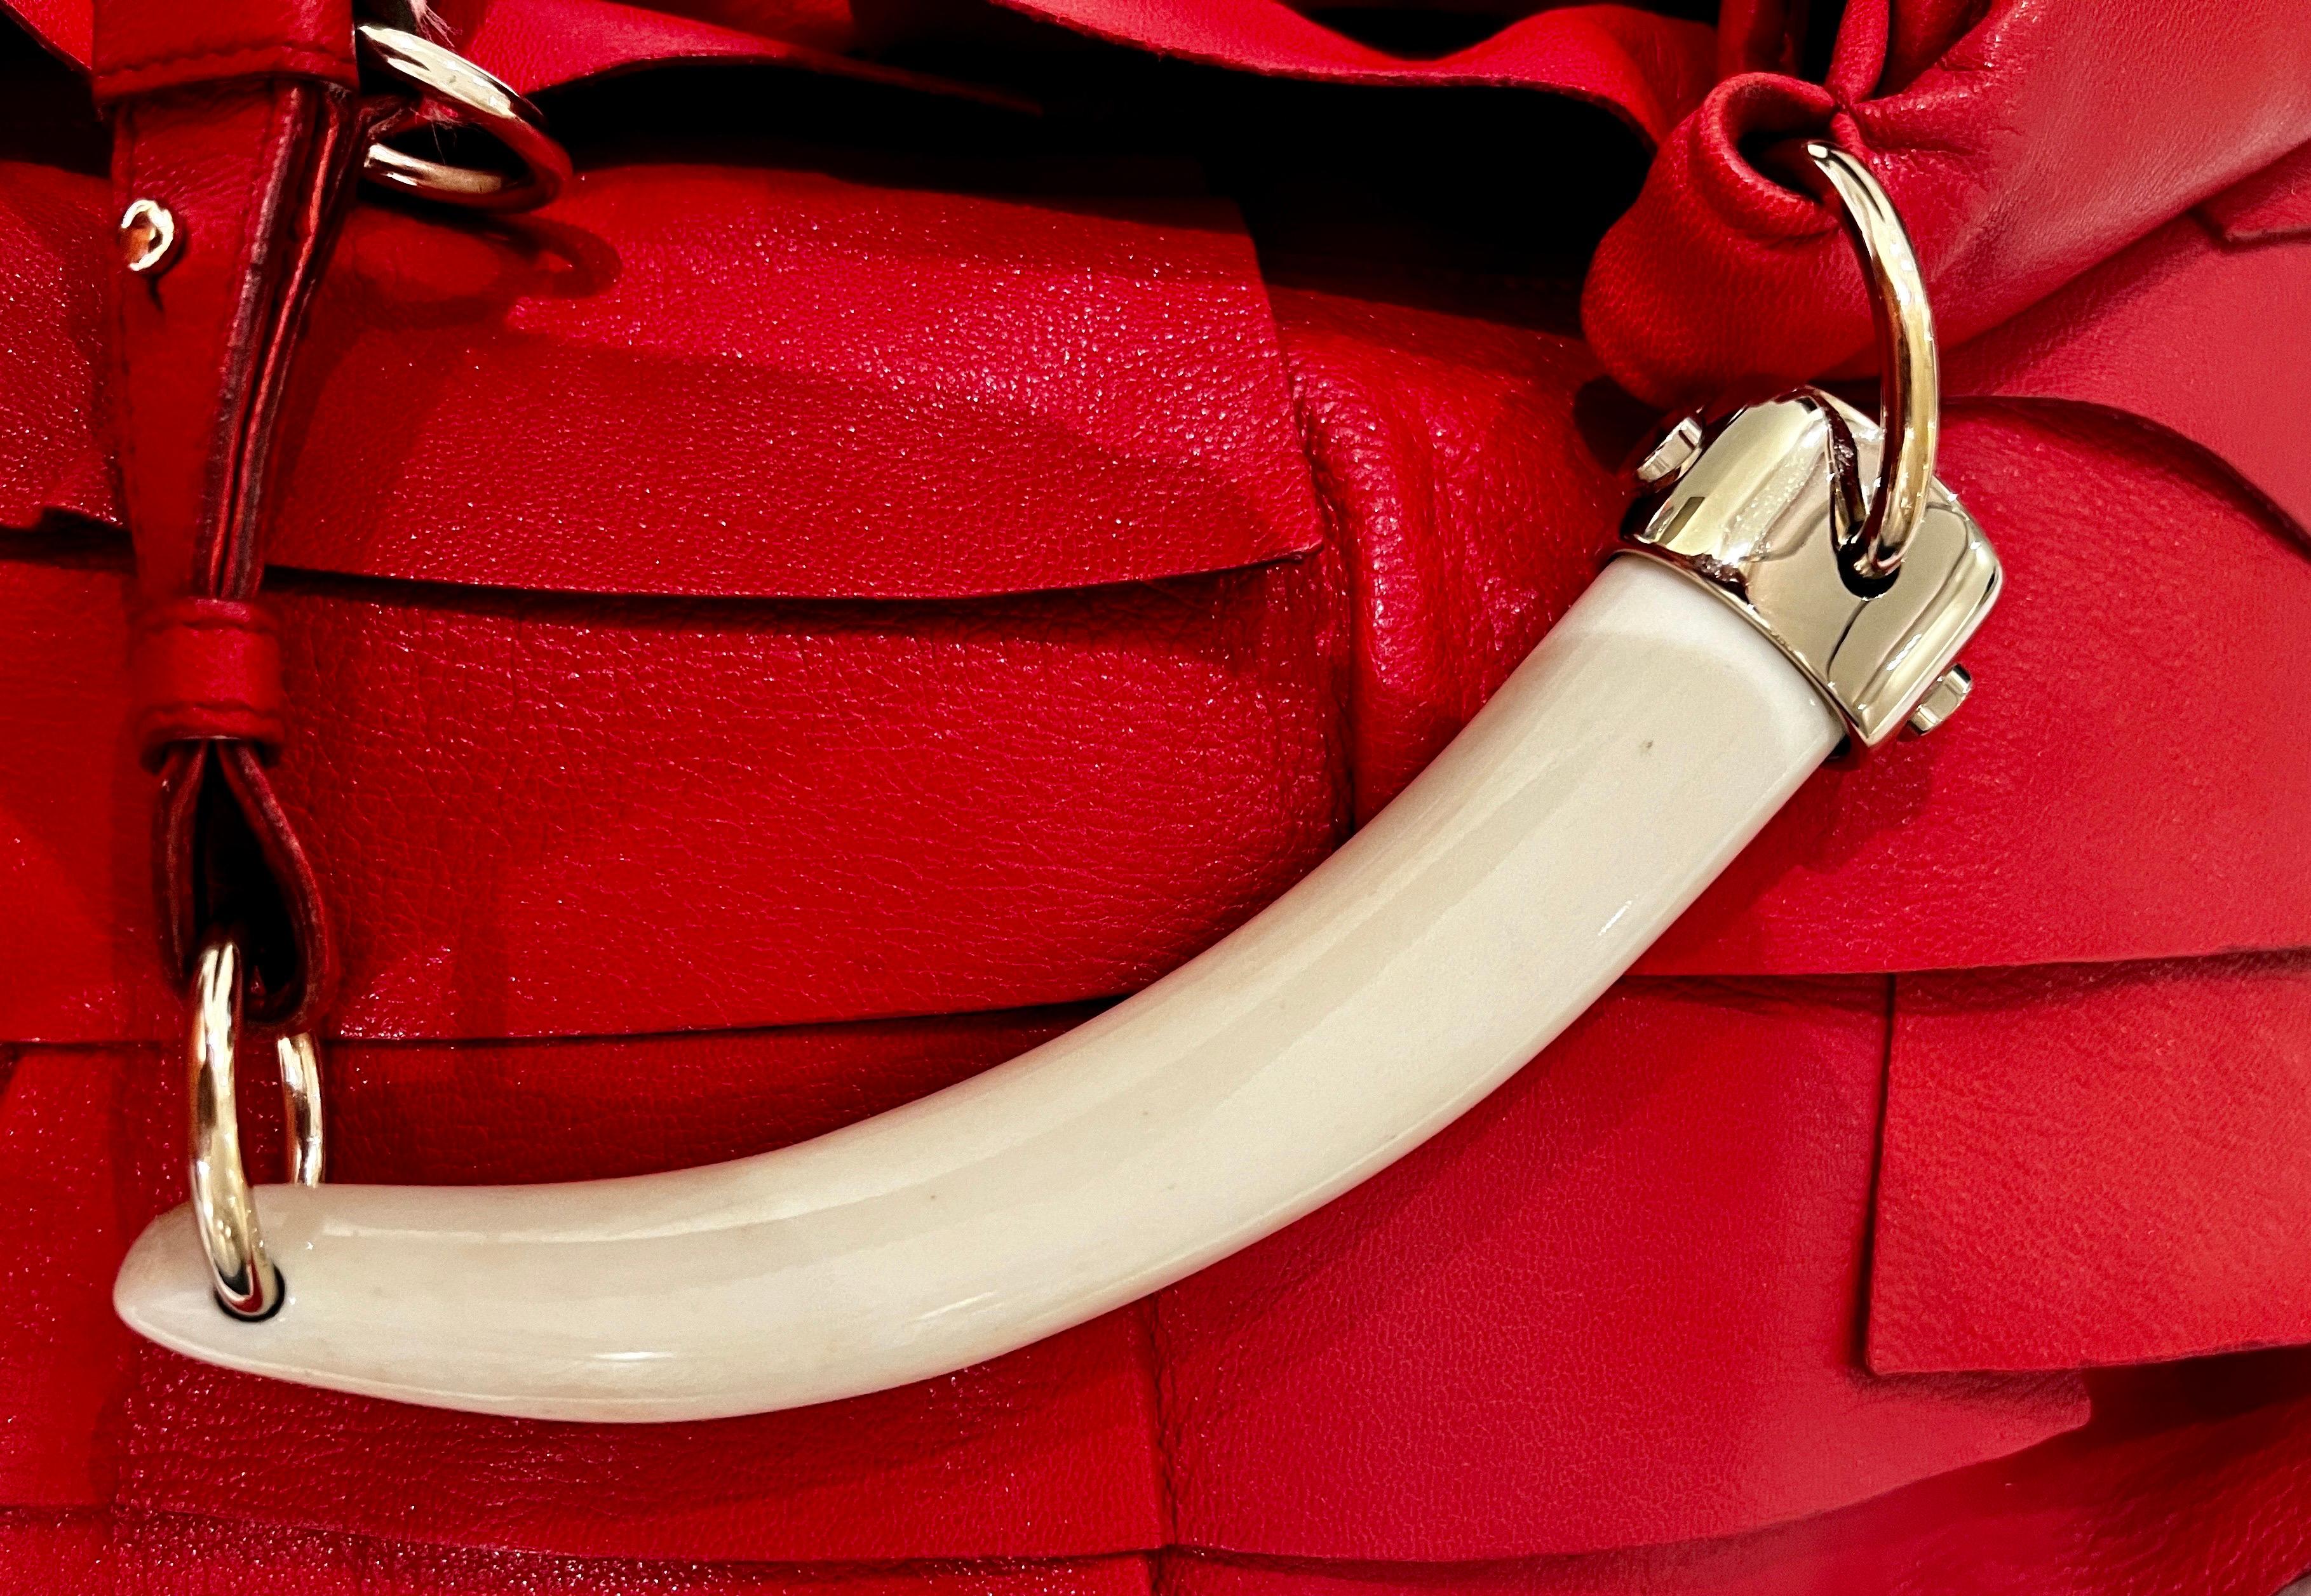 YSL Yves Saint Laurent by Tom Ford Lipstick Red XL Mombasa Shoulder Hand Bag In Good Condition For Sale In Switzerland, CH